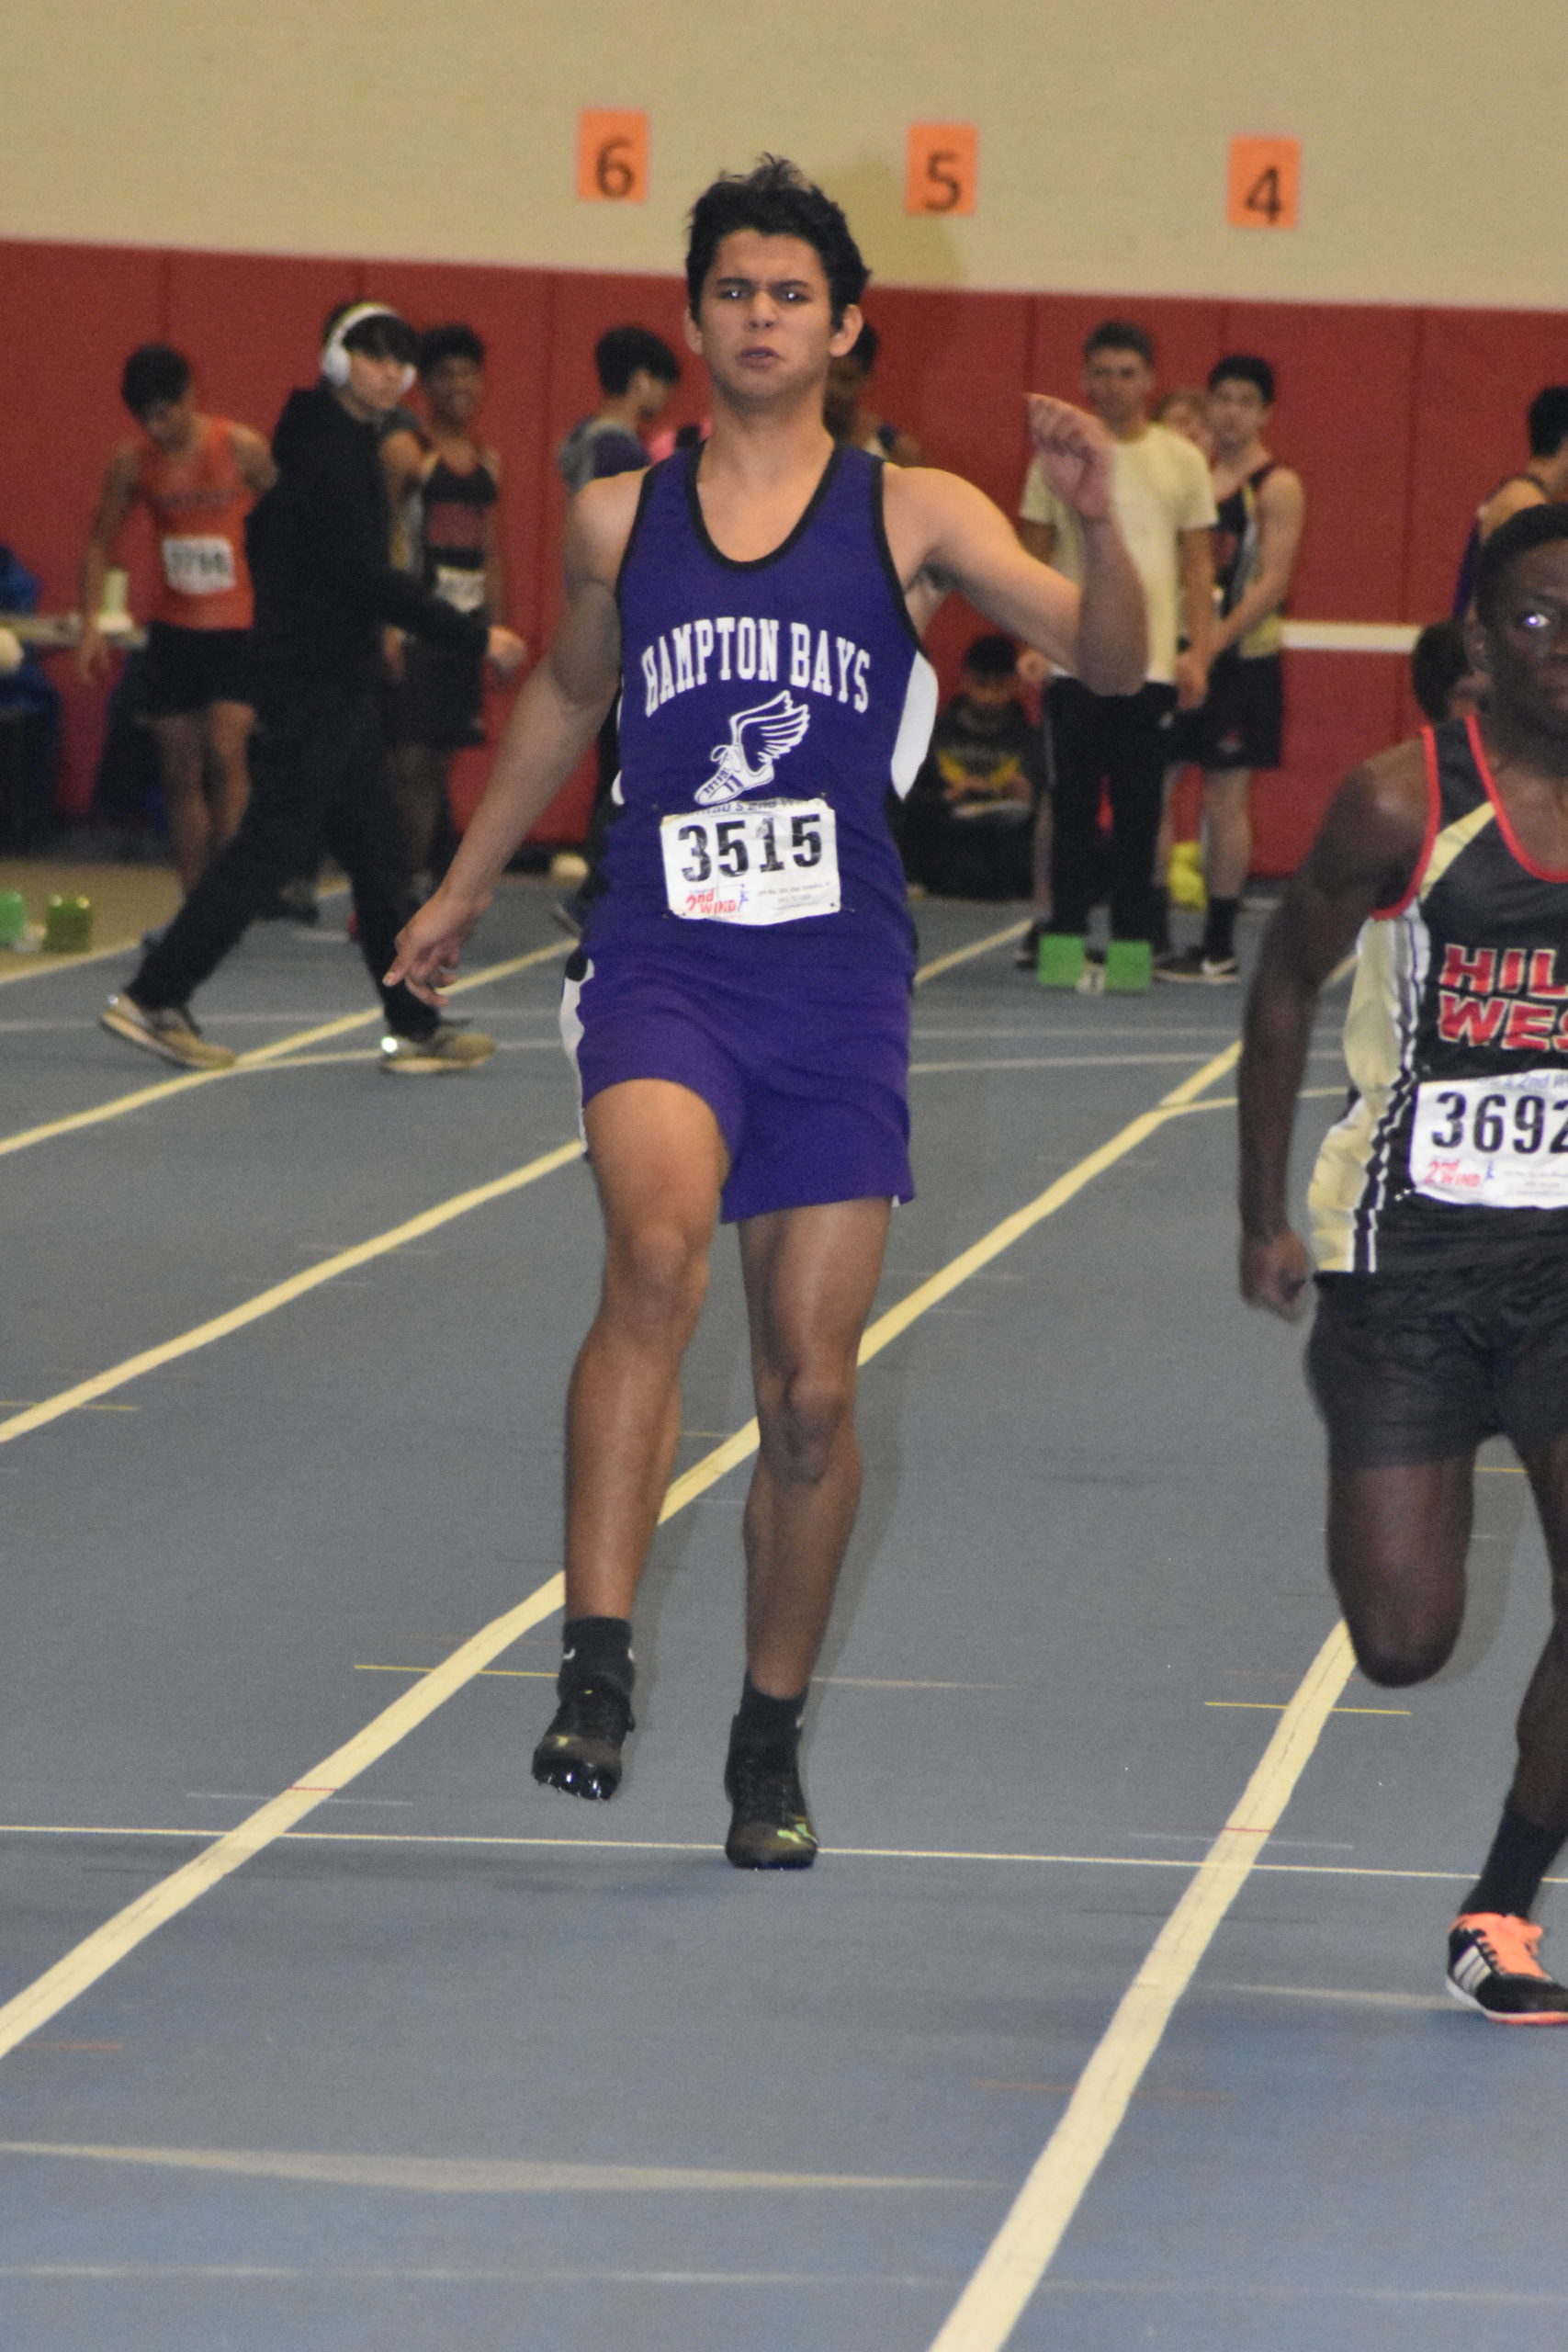 Hampton Bays junior Darwin Fernandez pulls up lame in the 55-meter dash. He wound up pulling his hamstring and has to scratch himself from the 600-meter run.